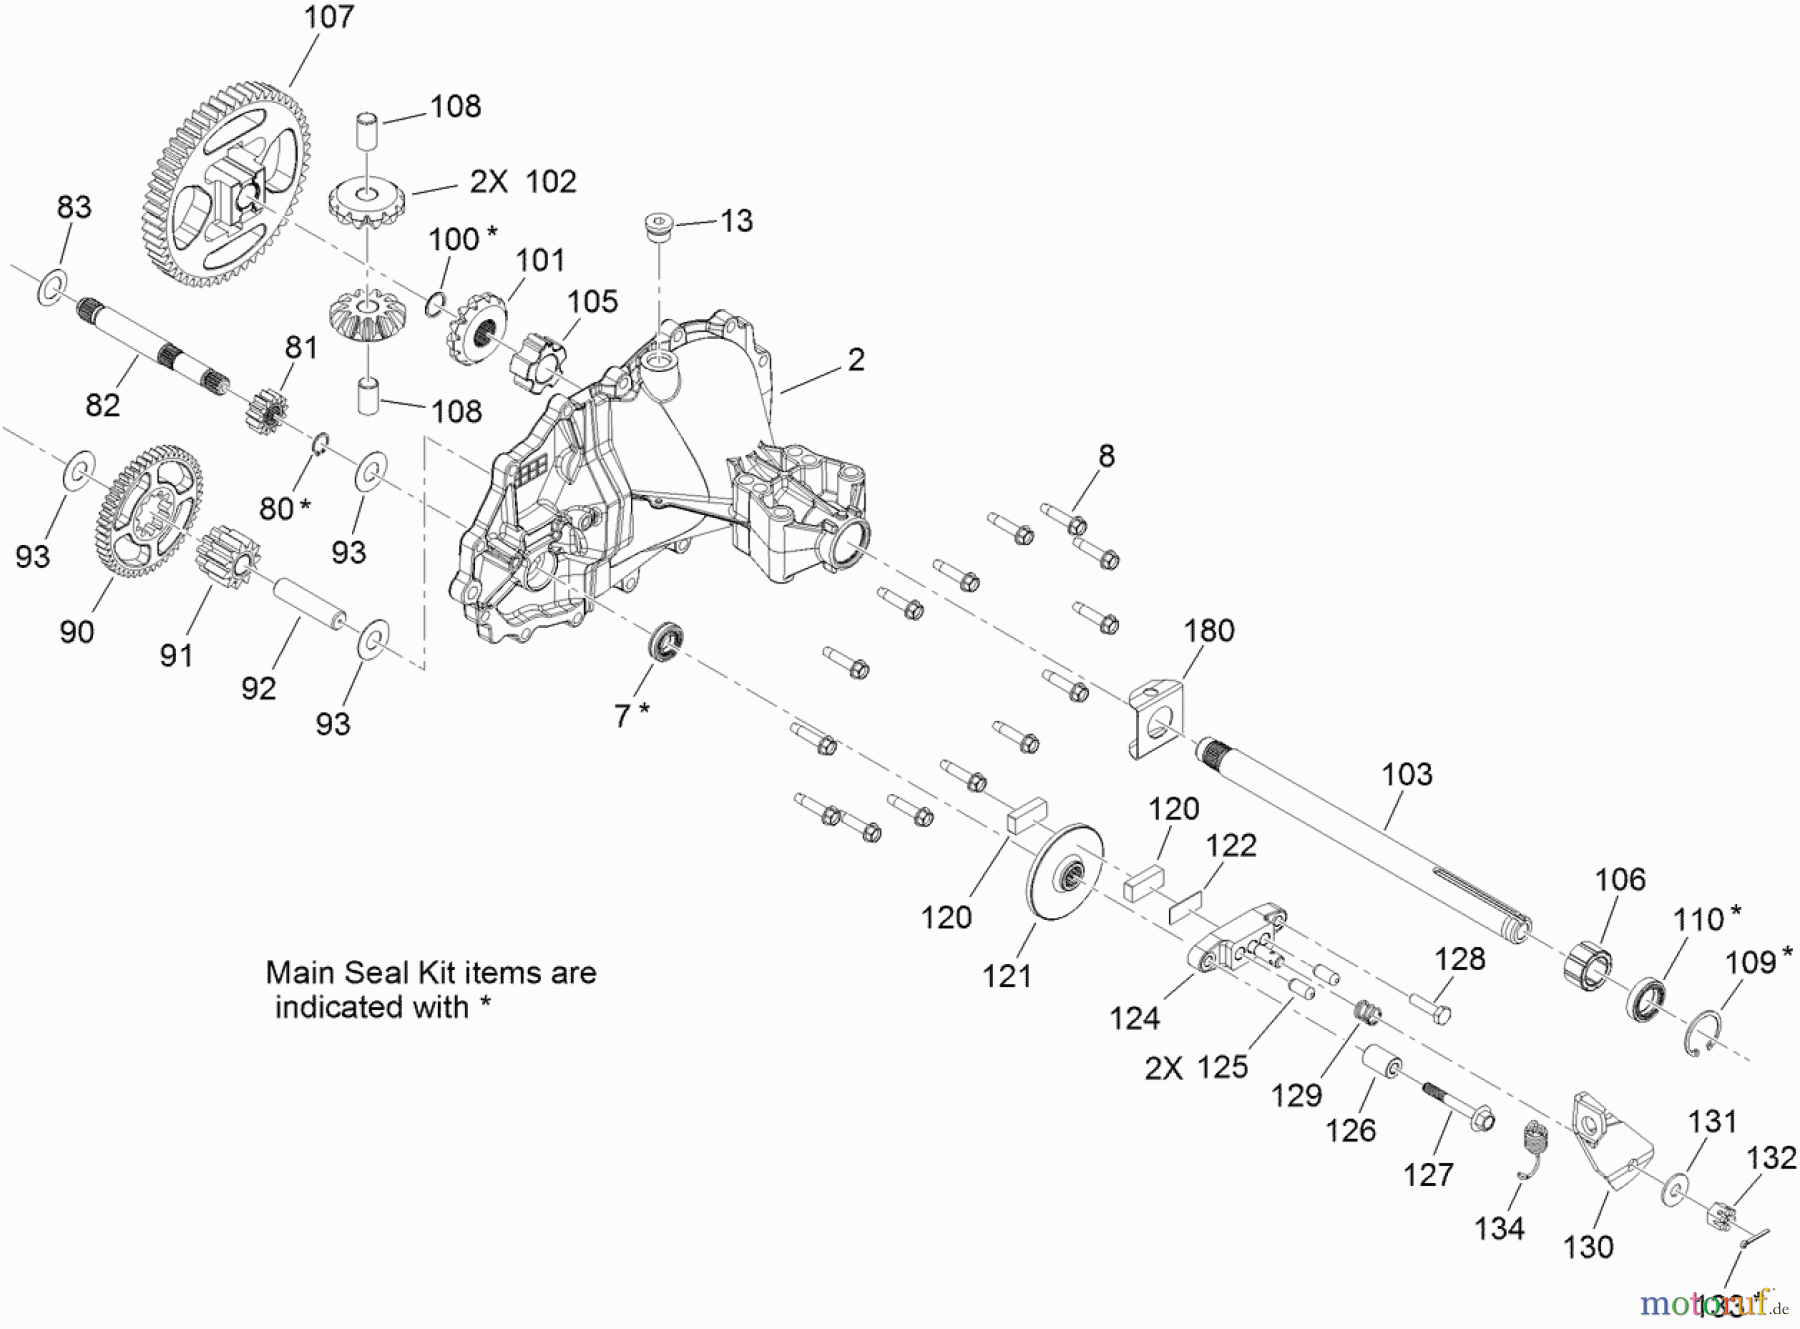  Toro Neu Mowers, Lawn & Garden Tractor Seite 1 74560 (DH 140) - Toro DH 140 Lawn Tractor, 2012 (SN 312000001-312999999) SIDE HOUSING TRANSMISSION ASSEMBLY NO. 121-0999